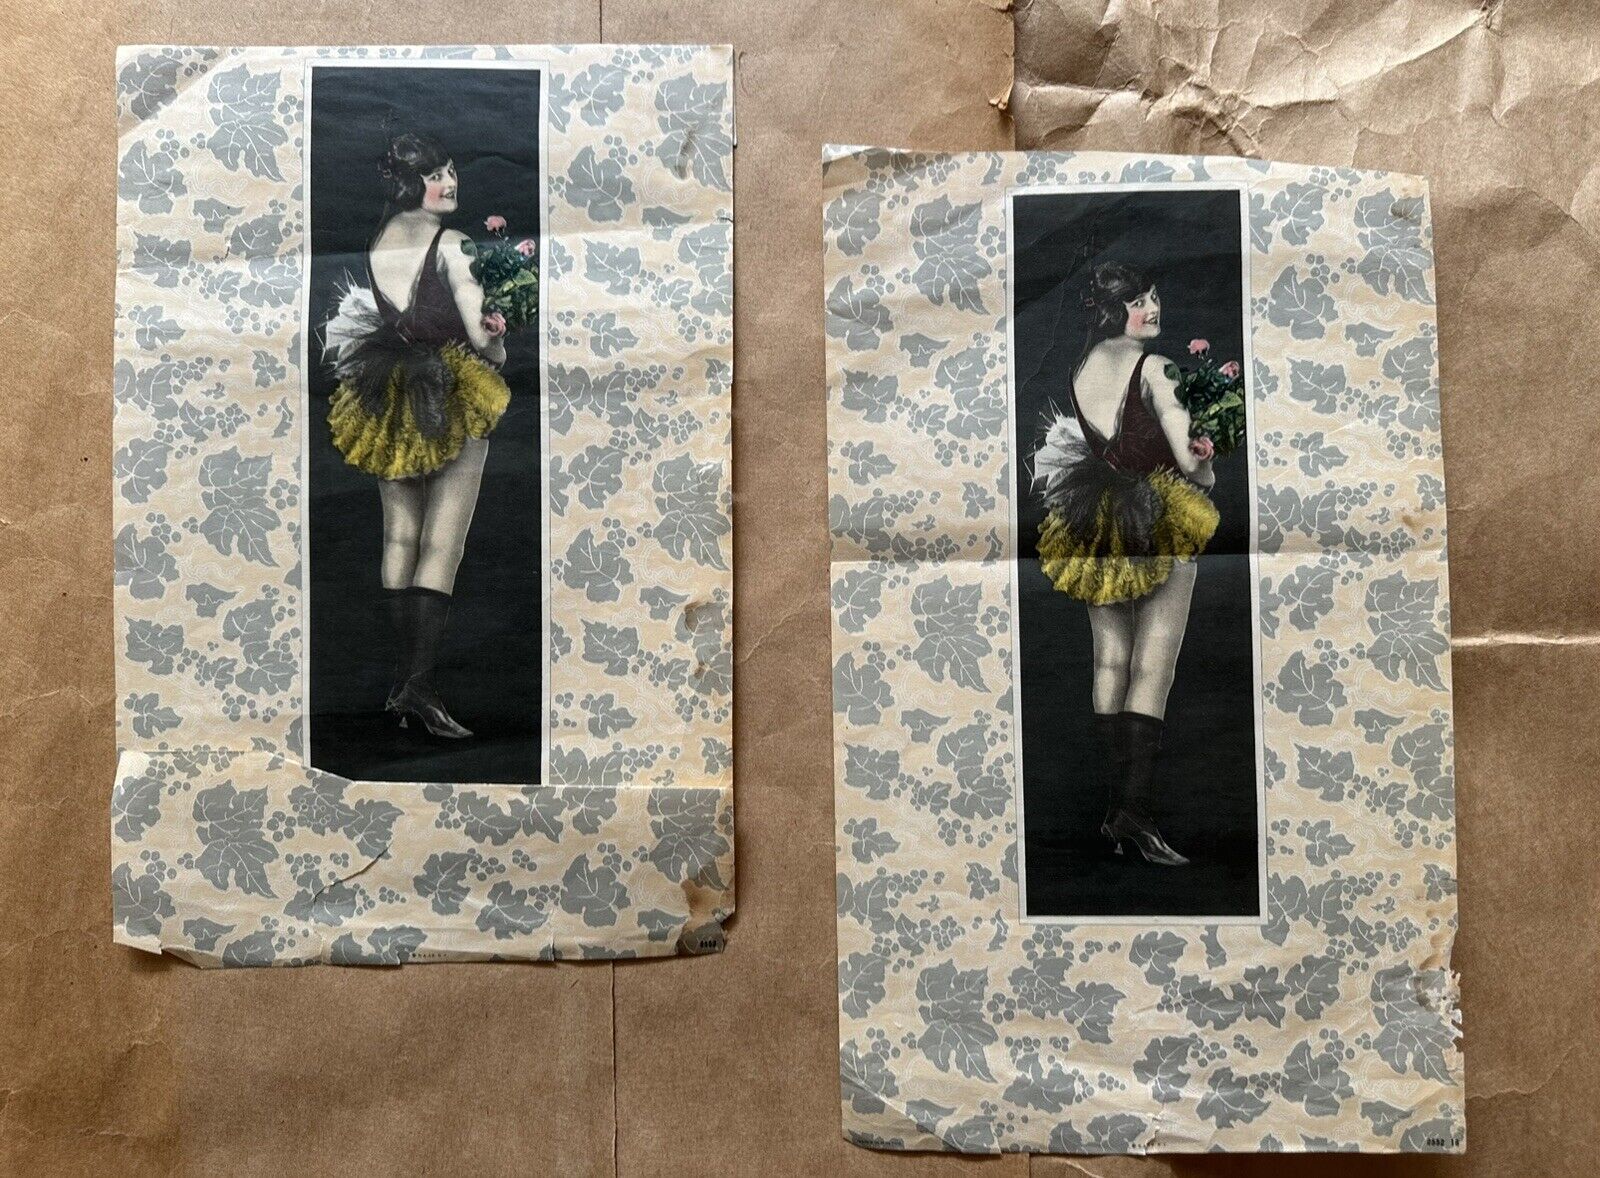 Antique 1910s risqué women in costumes floral paper prints lot of 2 (as is)